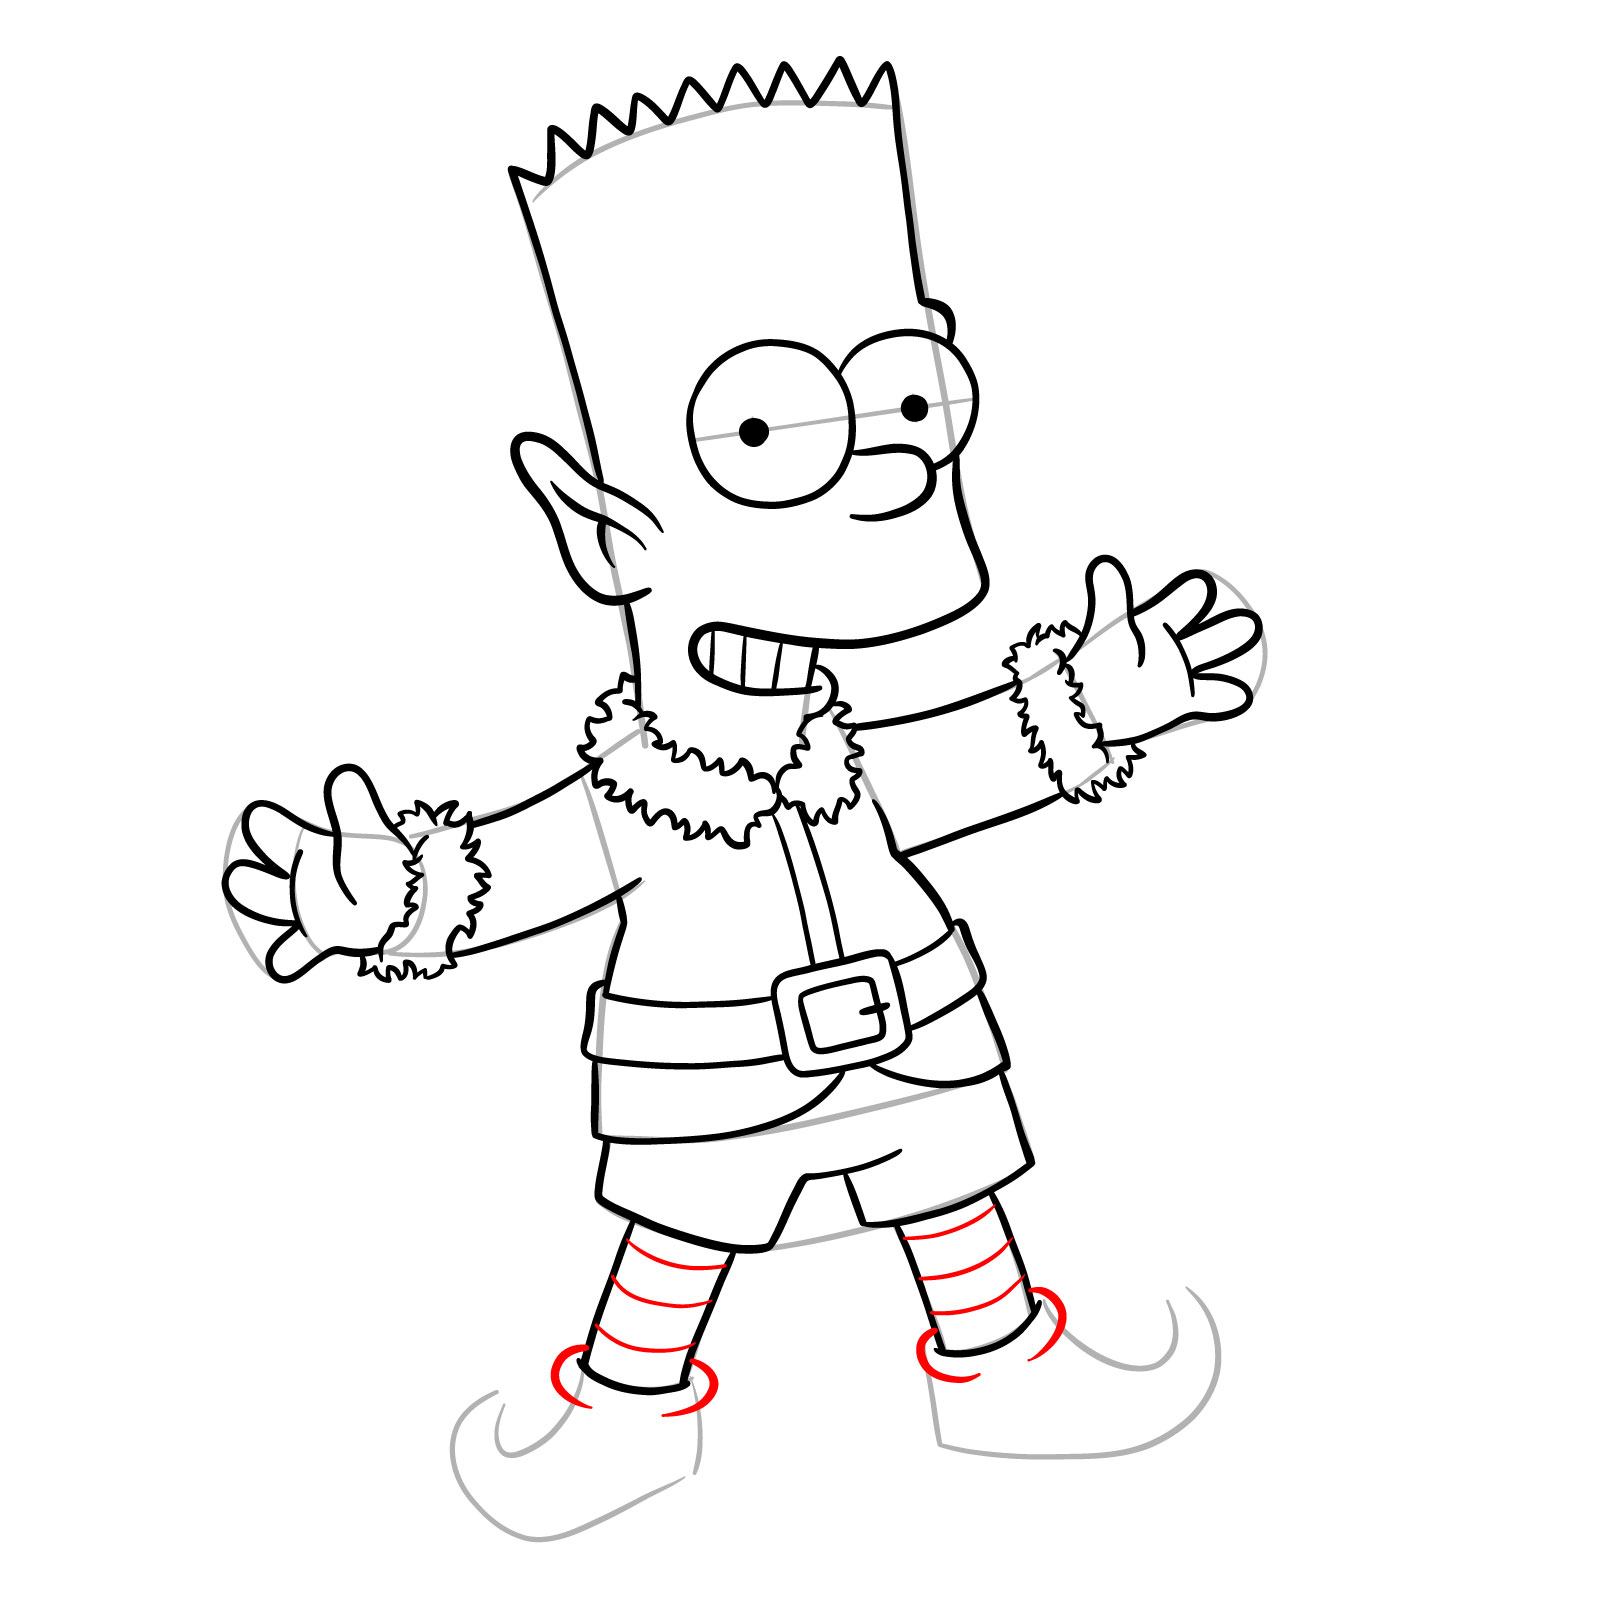 How to draw Bart Simpson as a Christmas Elf - step 27